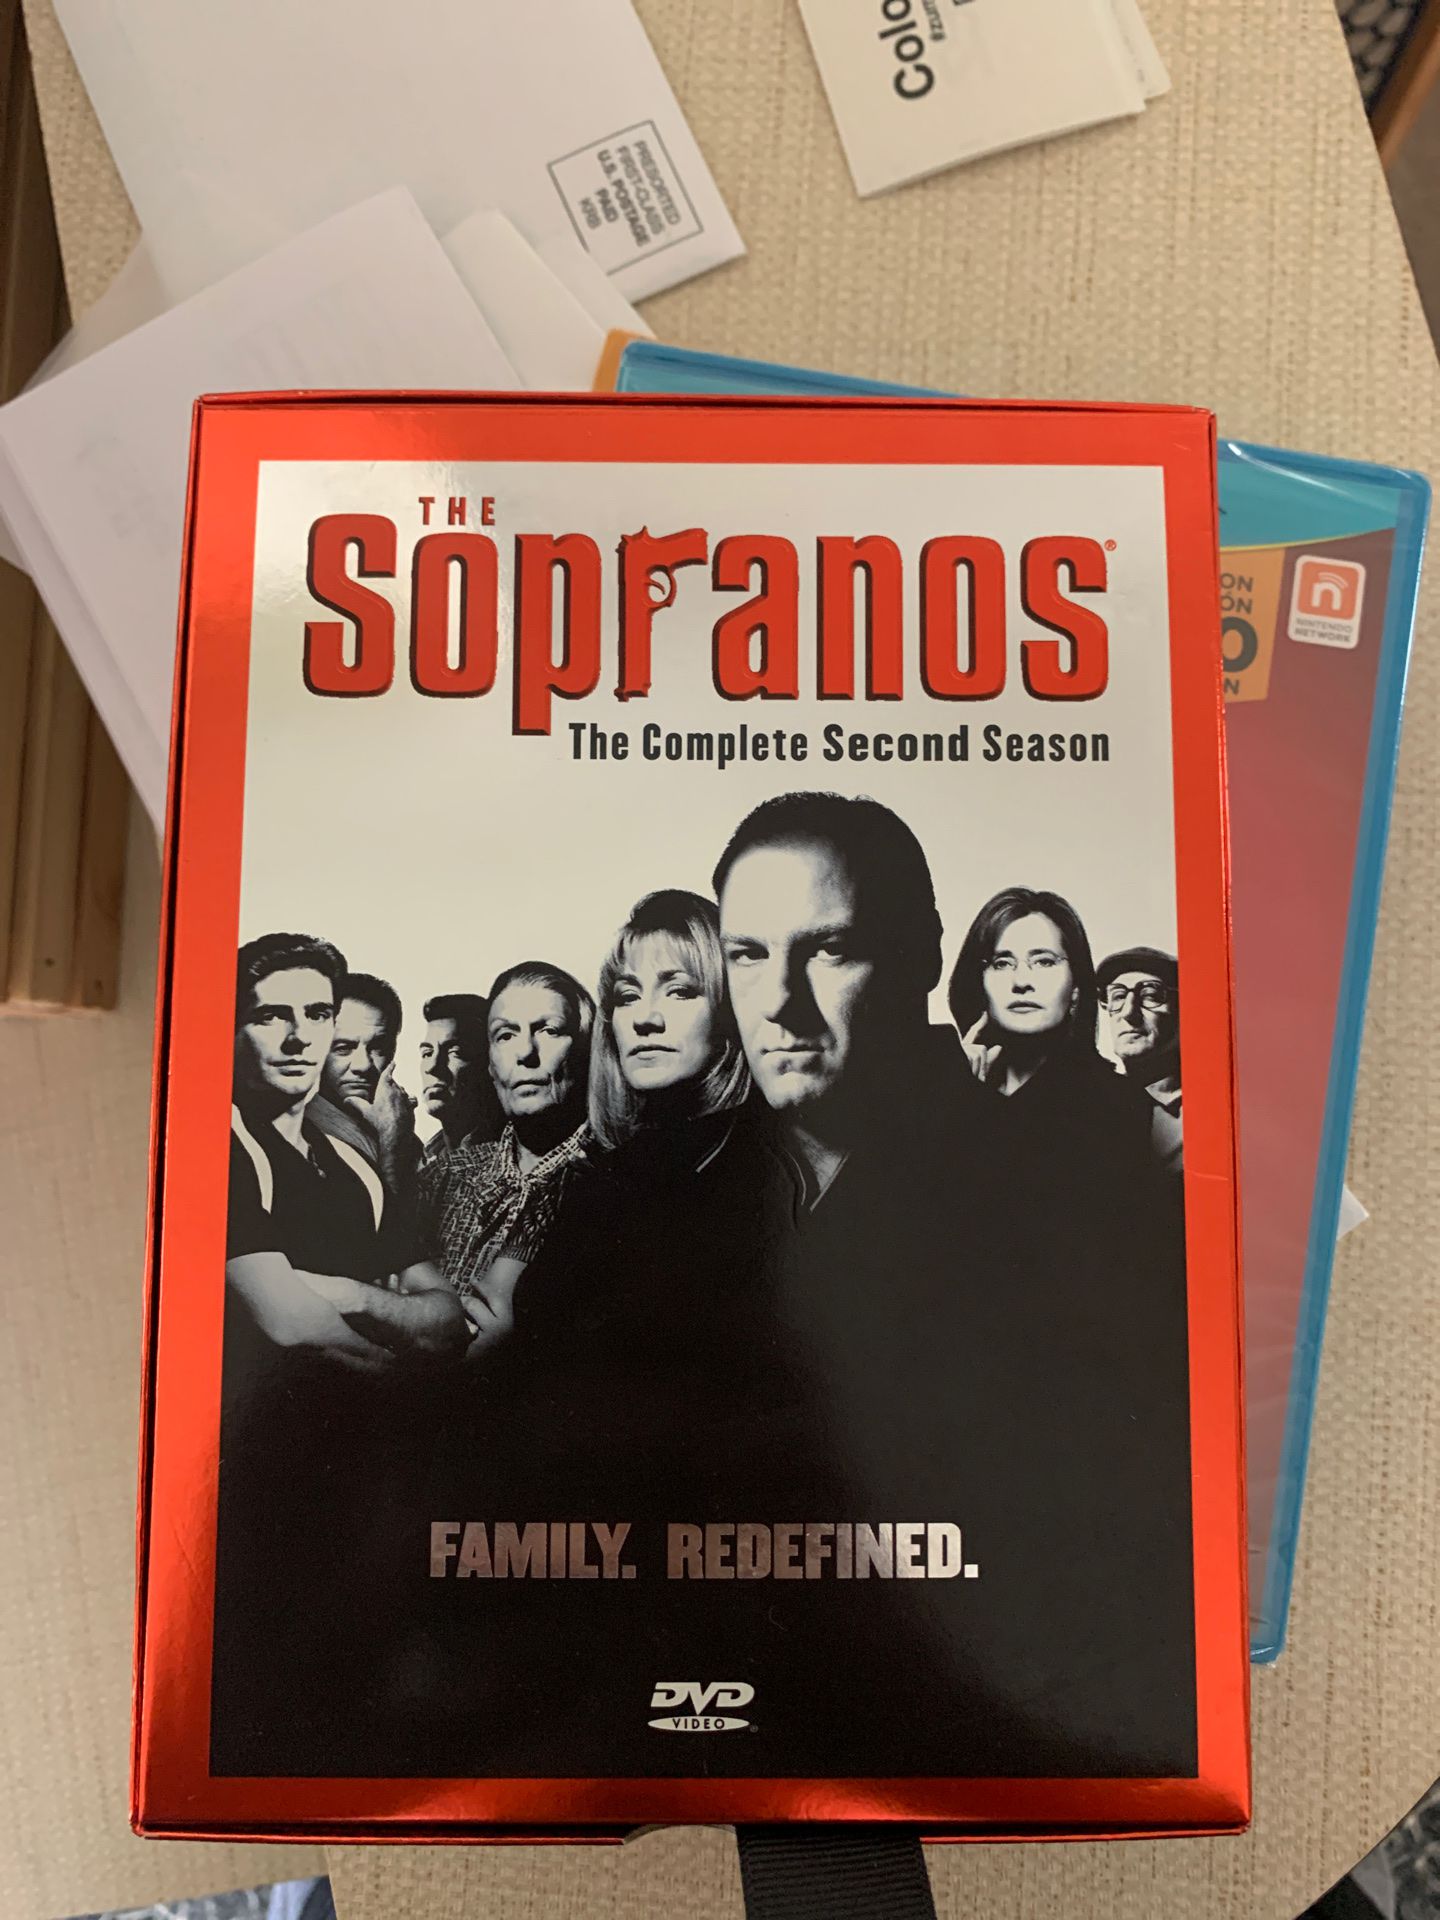 The sopranos. The complete 2nd season